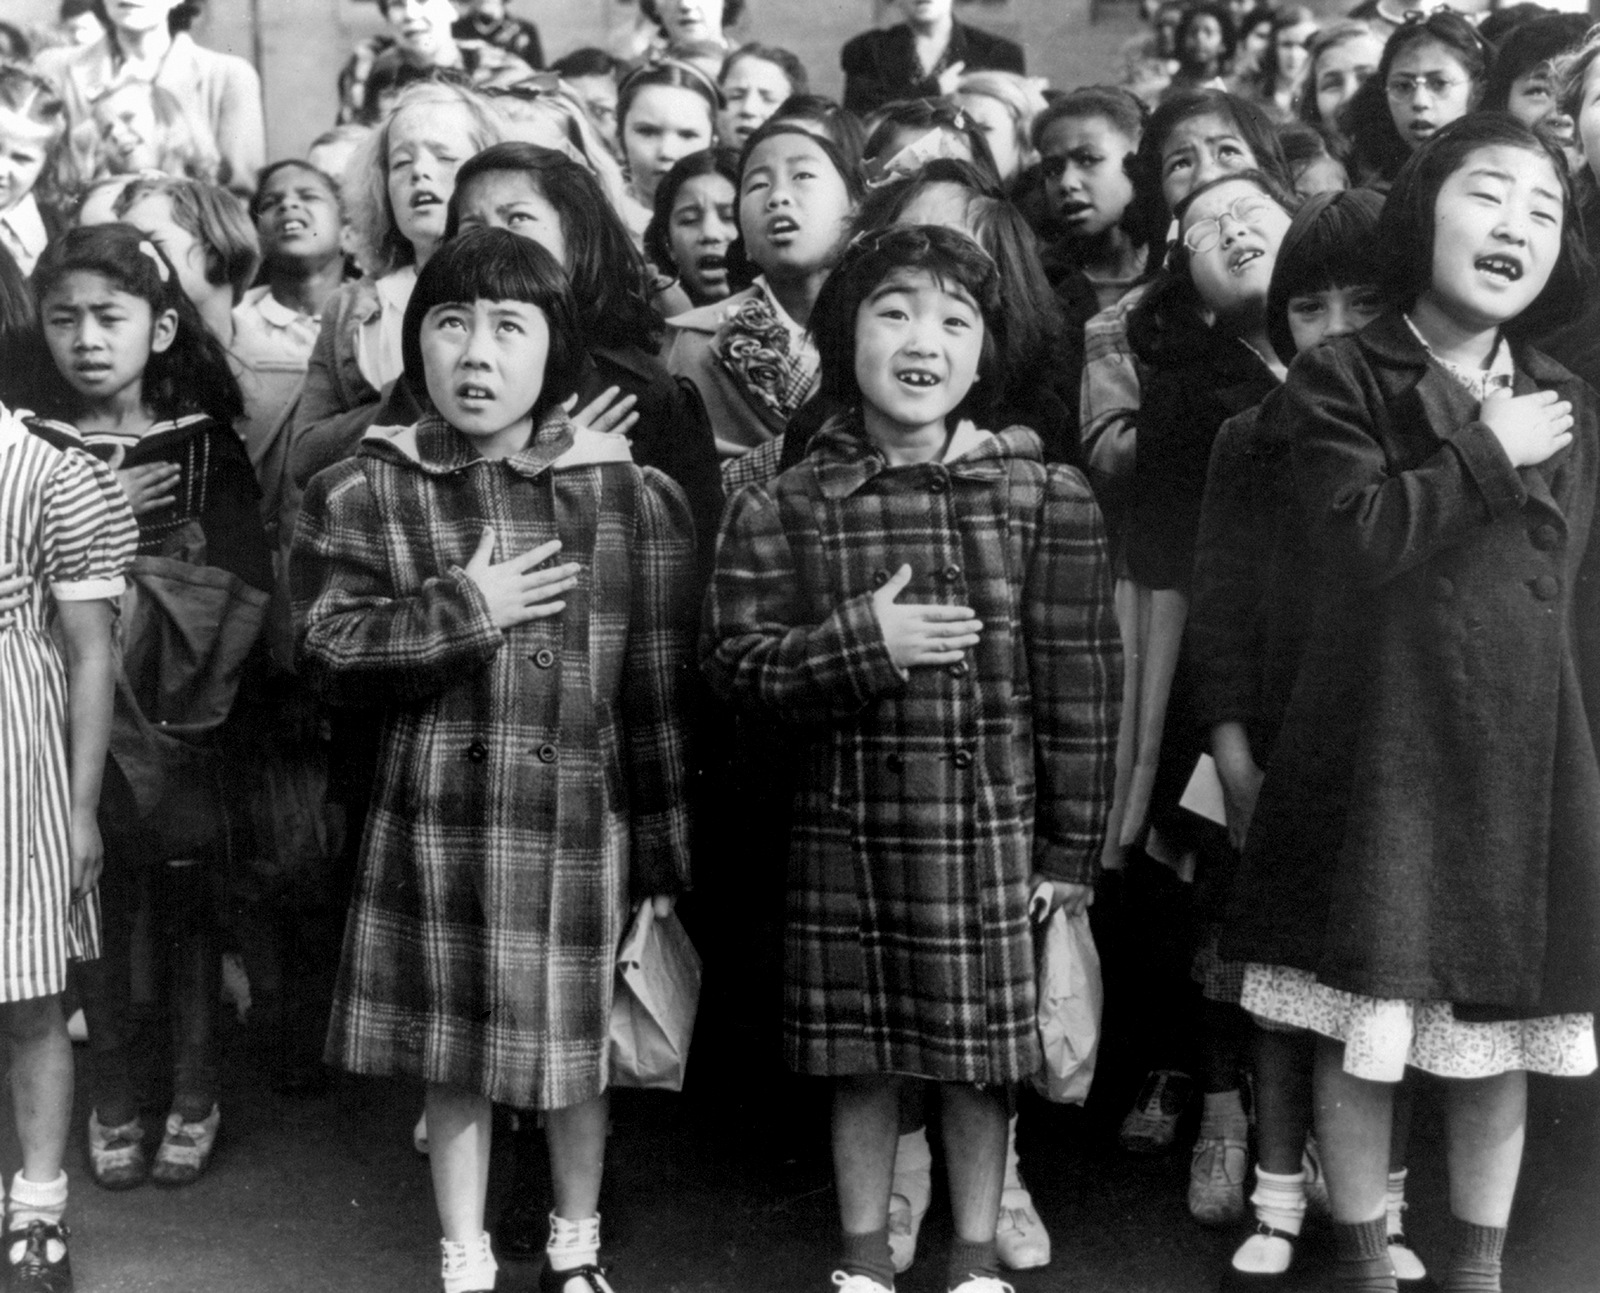 Children at the Weill public school in San Francisco recite the Pledge of Allegiance. Some of them are evacuees of Japanese ancestry who will be housed in War Relocation Authority centers for the duration of World War II, April 1942. Dorothea Lange | U.S. War Relocation Authority via AP